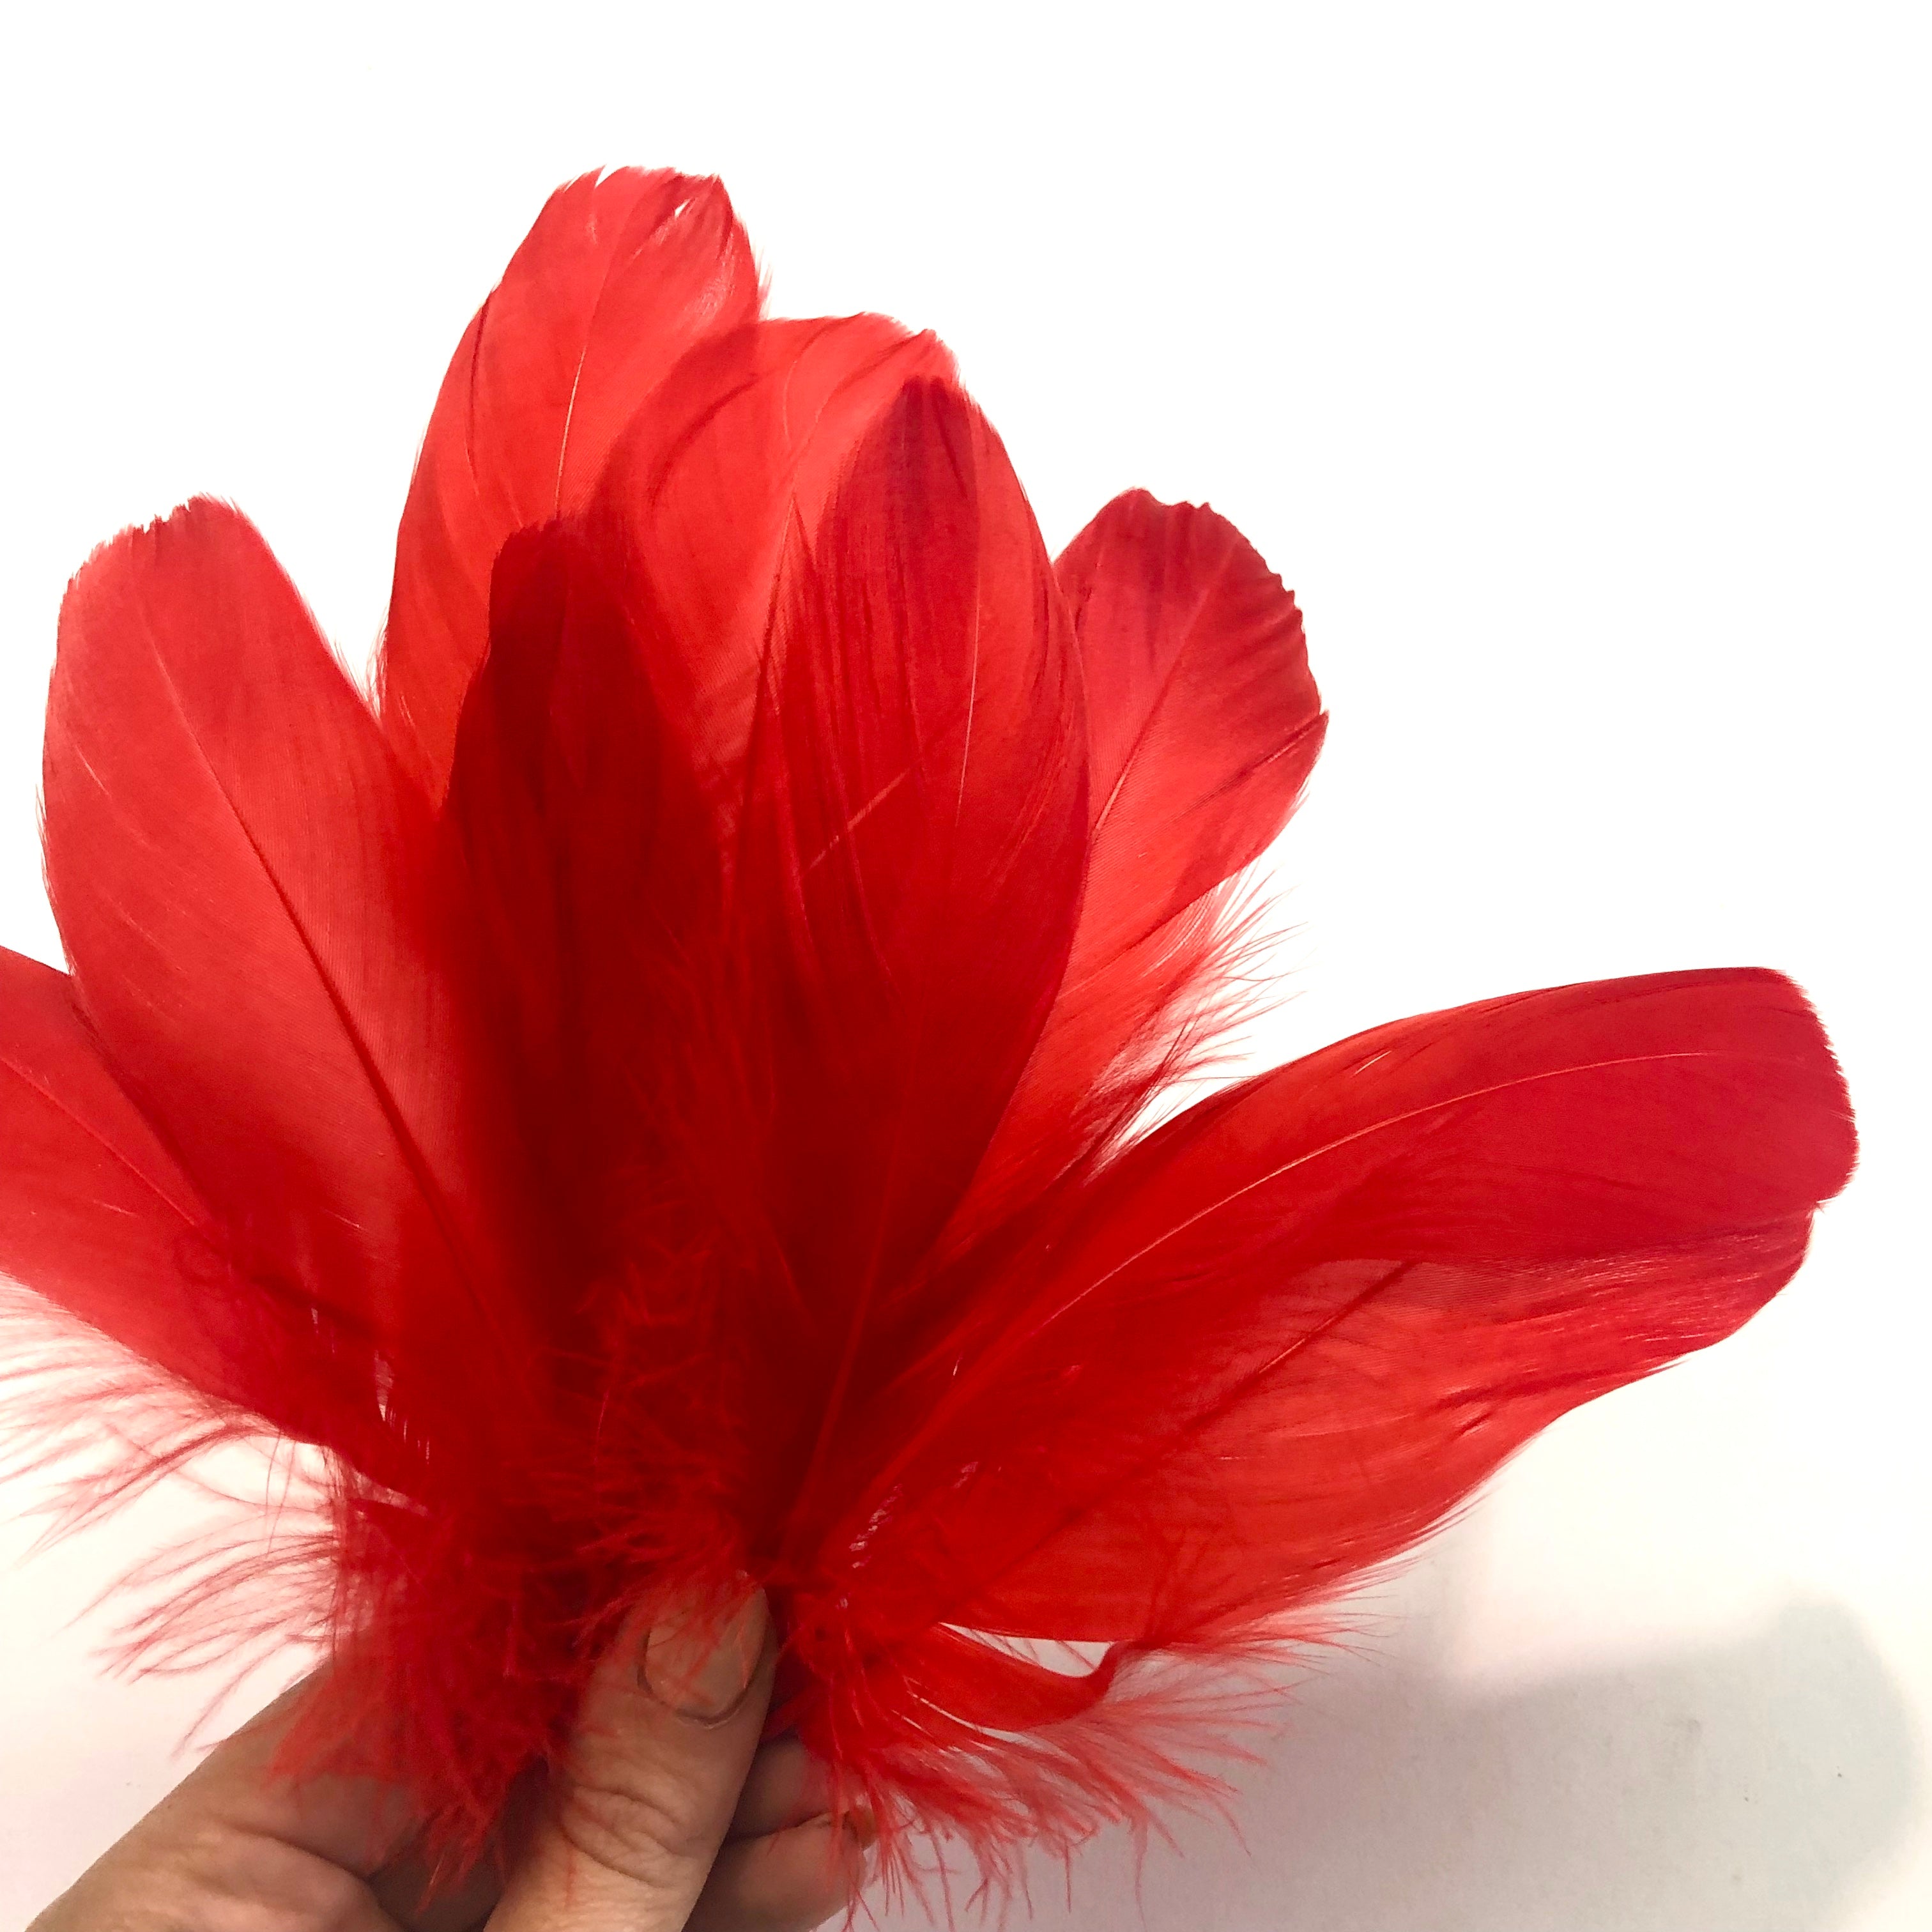 Goose Nagoire Feathers 10 grams - Red